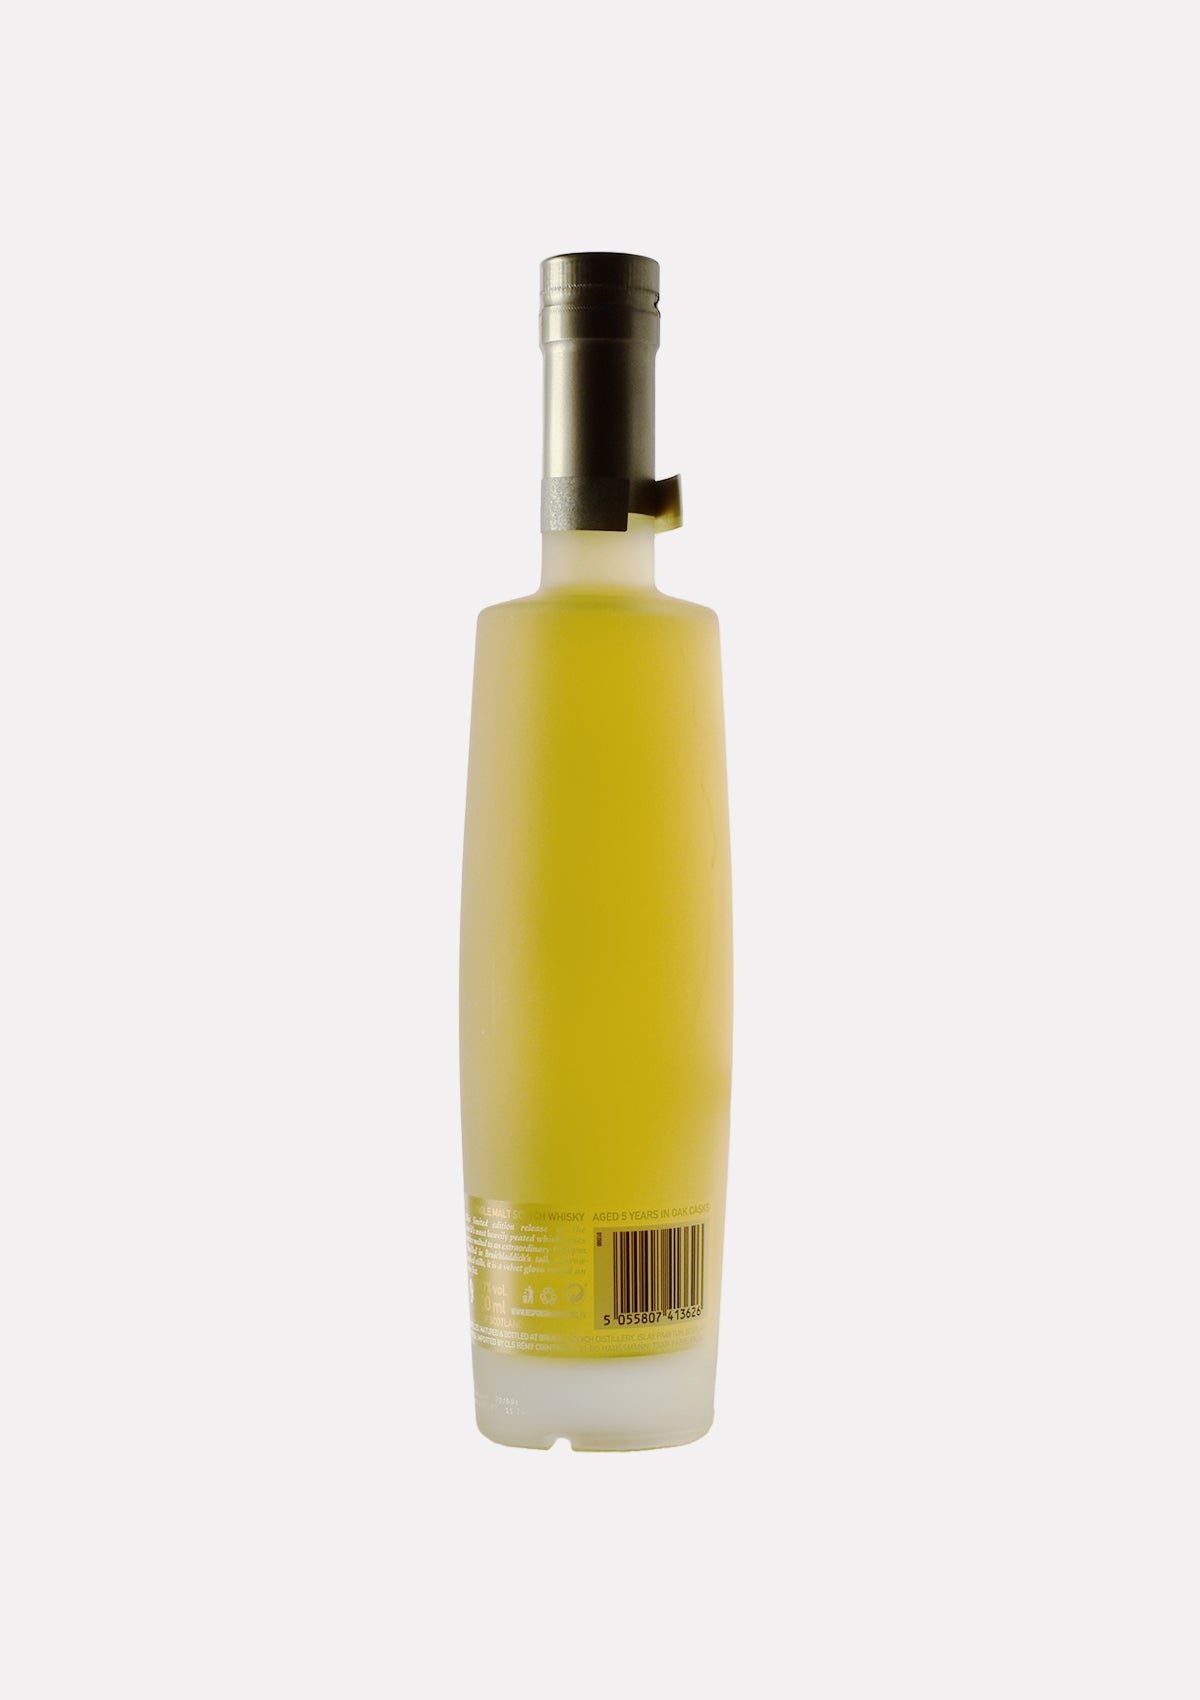 Octomore 11.3 194 ppm